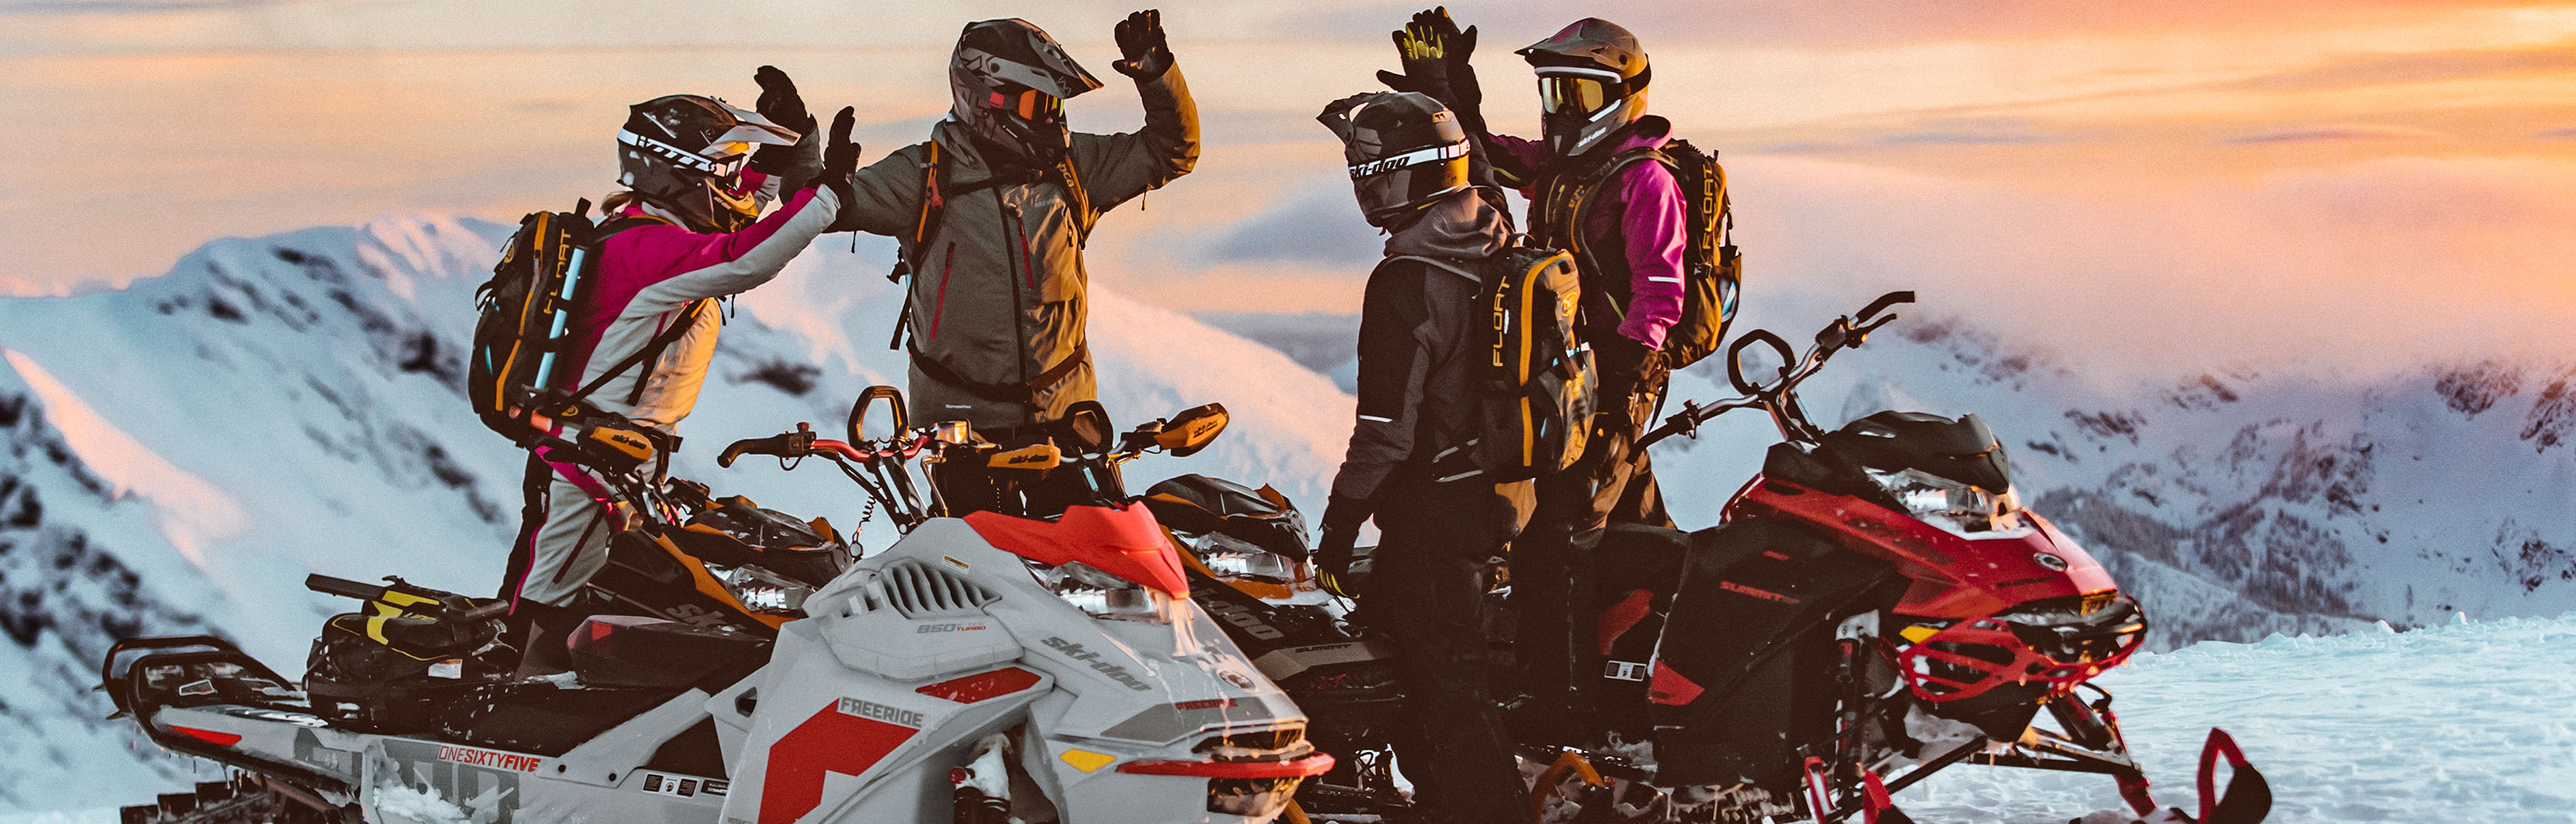 5 COOL THINGS ABOUT SKI-DOO